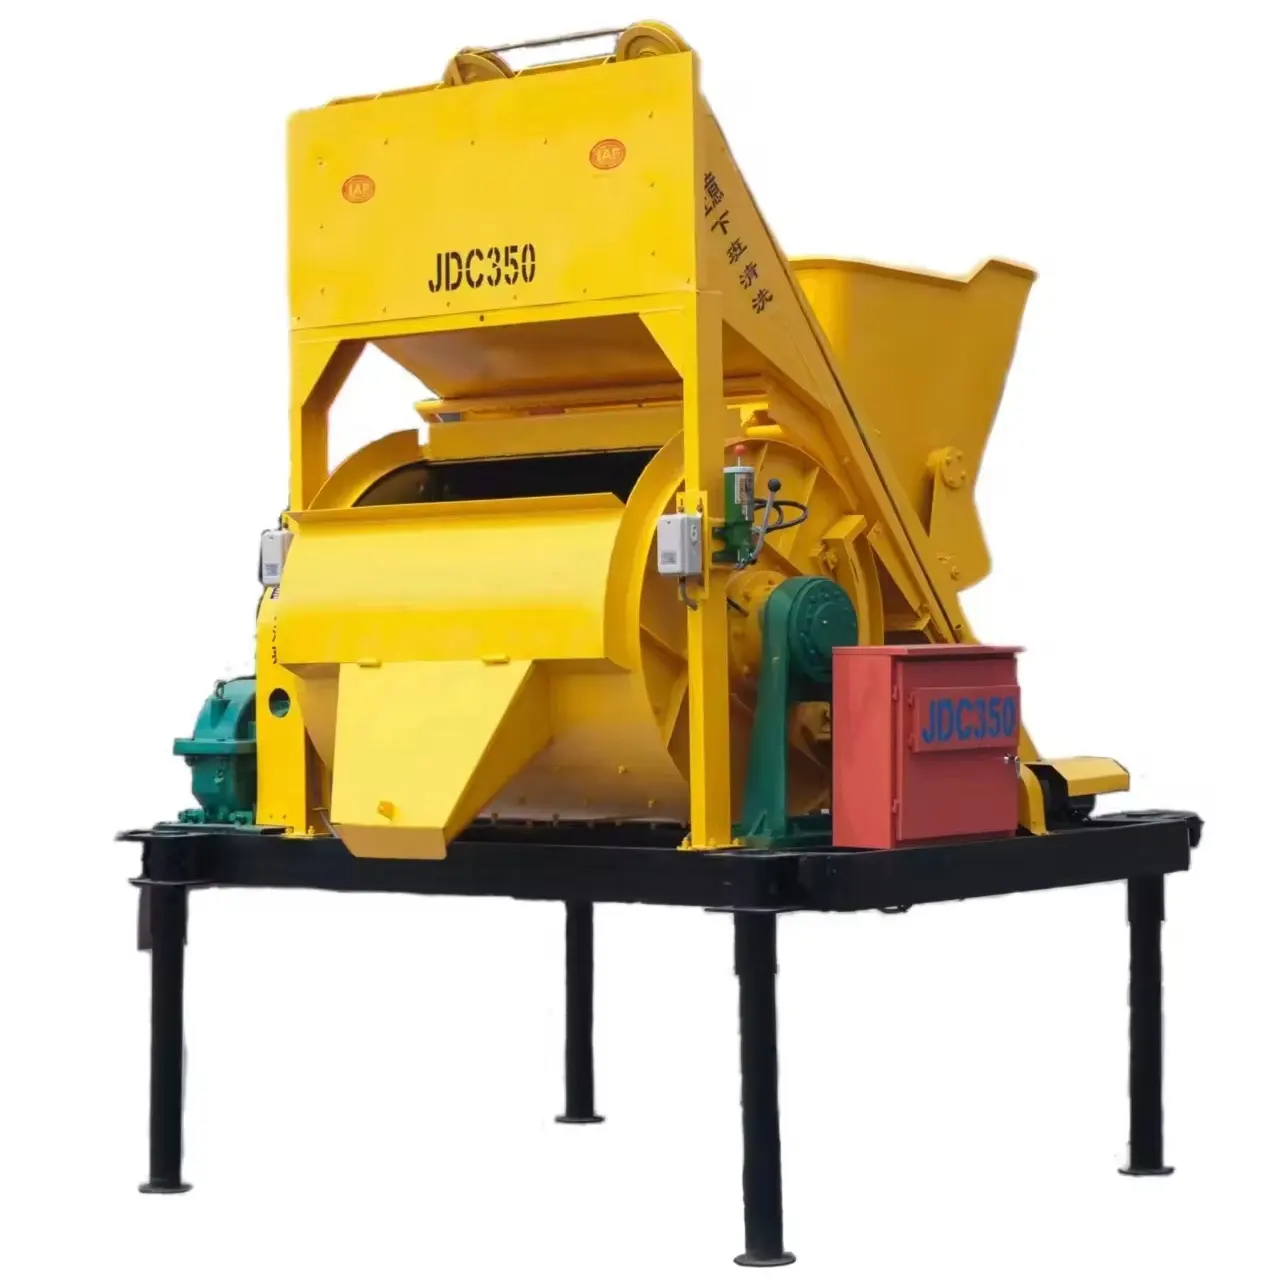 Limited Time Discount on Official JDC350 18m3/h Single Horizontal Shaft Cement Batching Machine with Concrete Pump